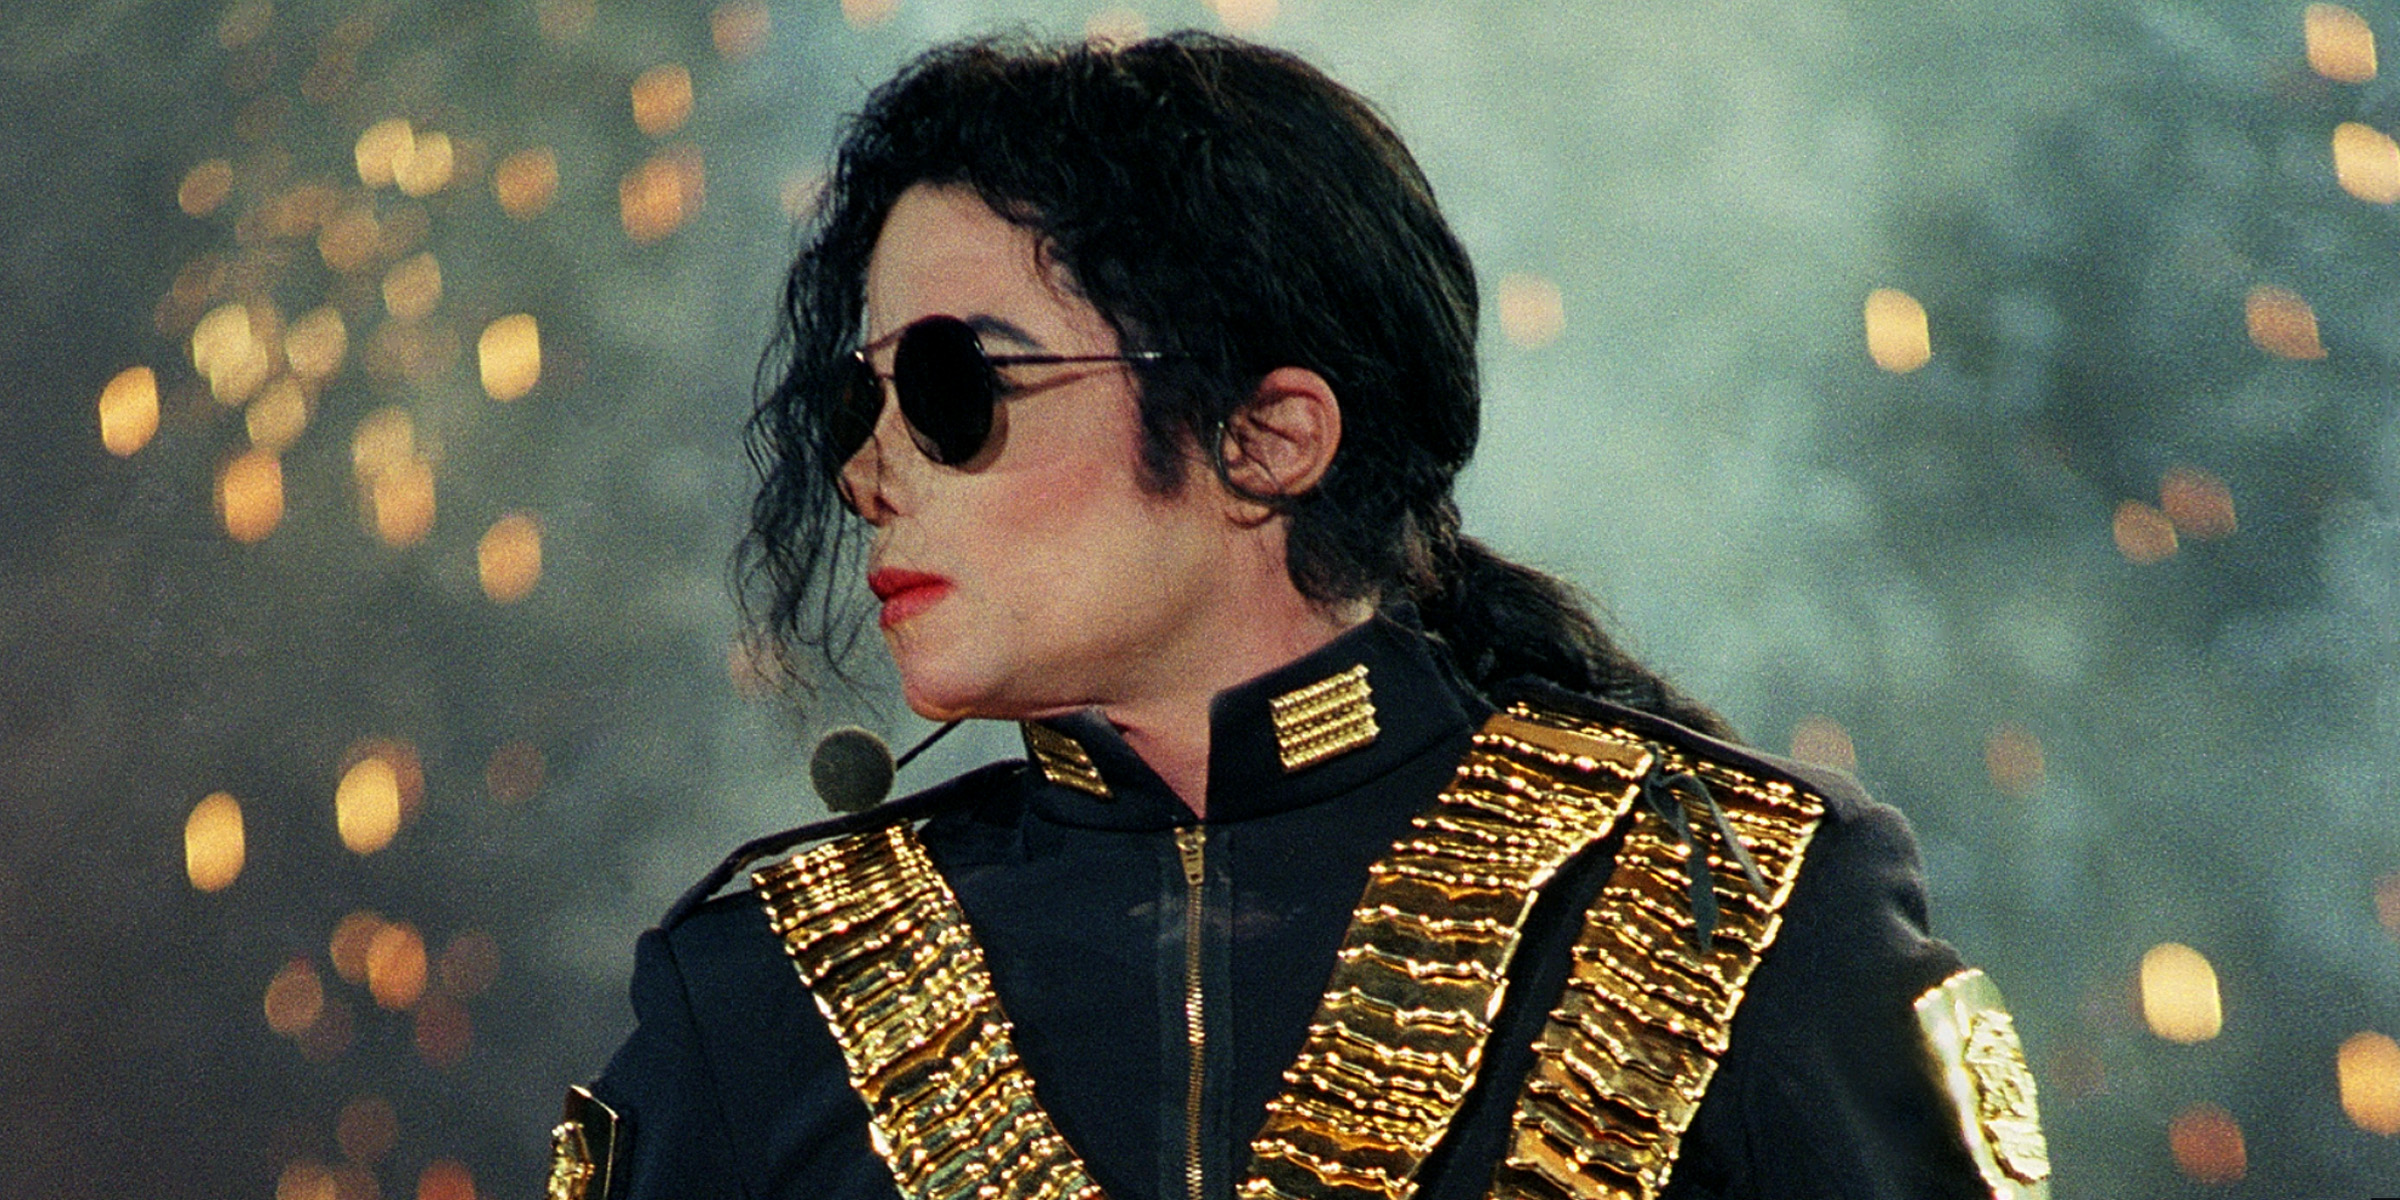 Michael Jackson | Source: Getty Images